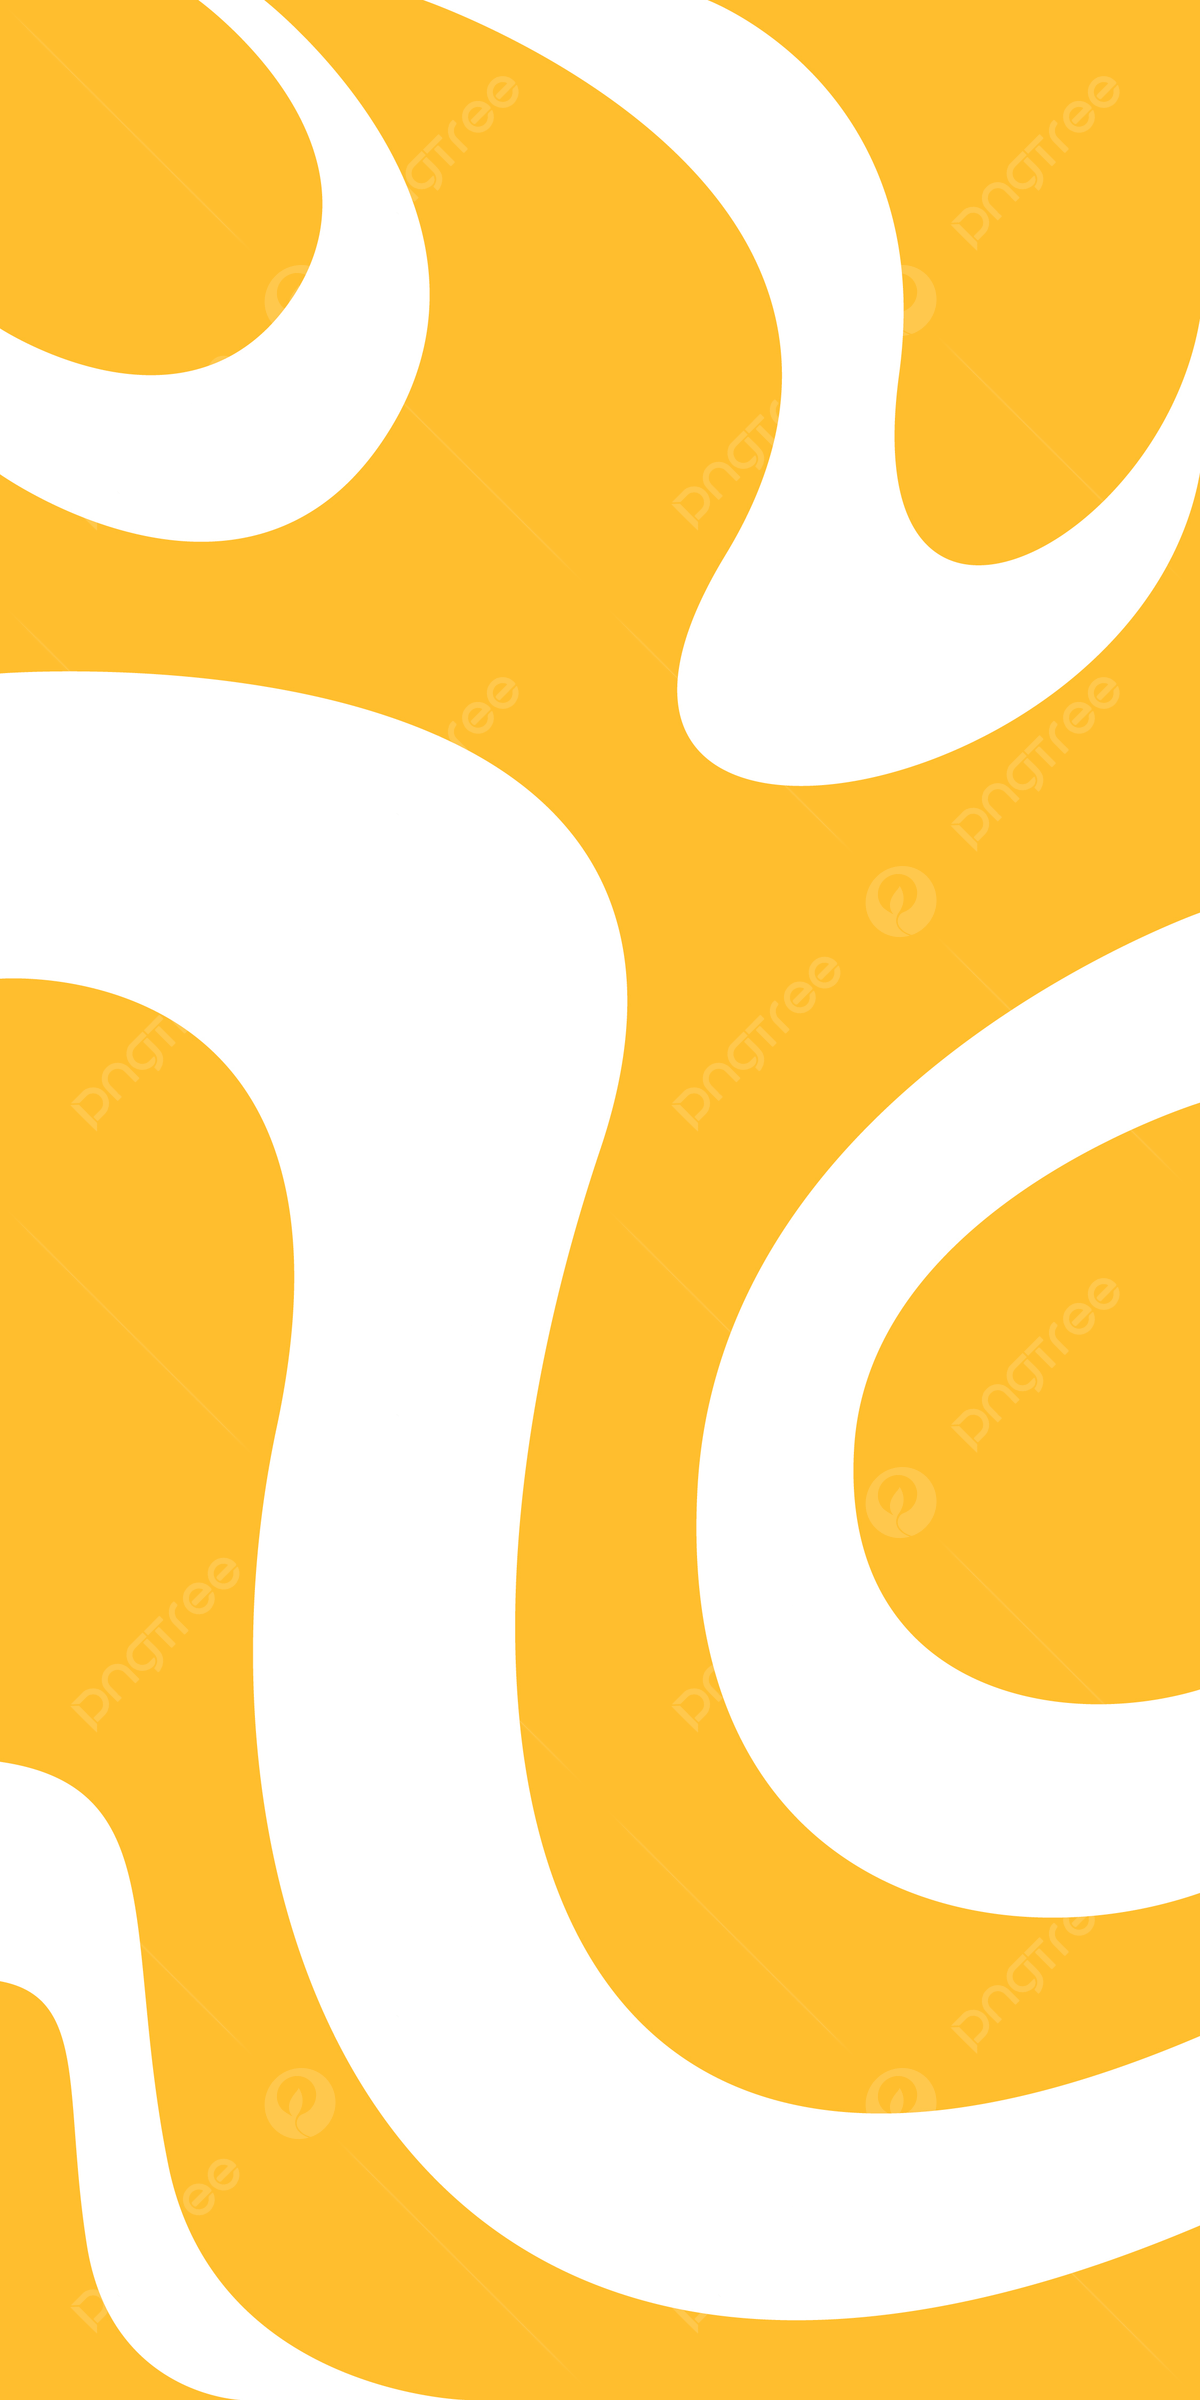 A yellow and white background with swirling lines - Pastel orange